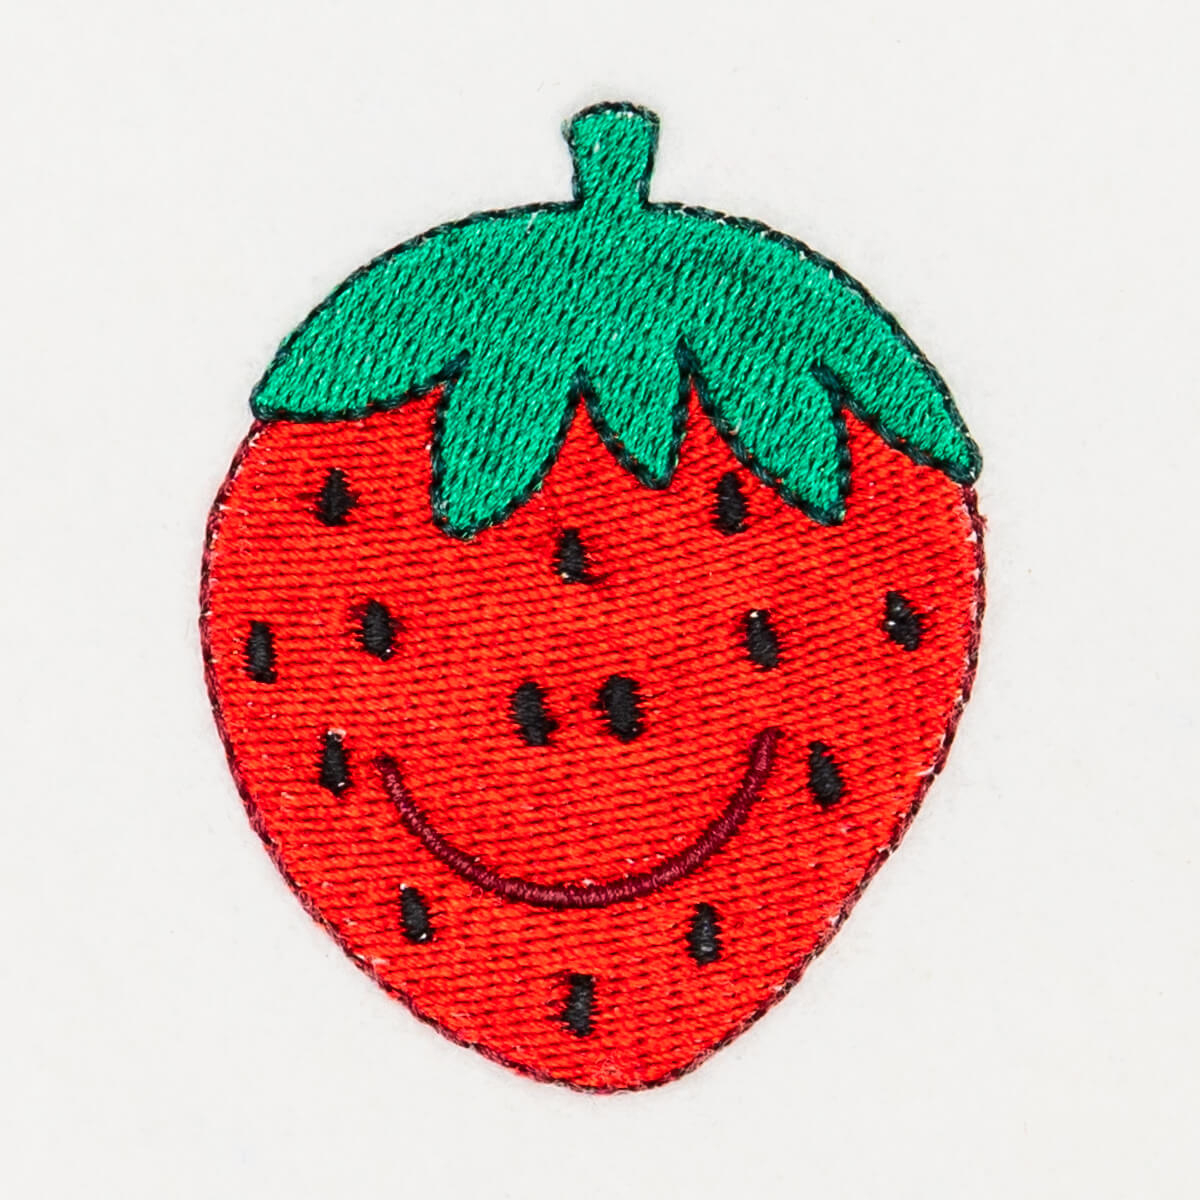 Strawberry Embroidery Pattern Strawberry Embroidery Design 7 Sizes 699 At E Embroidery